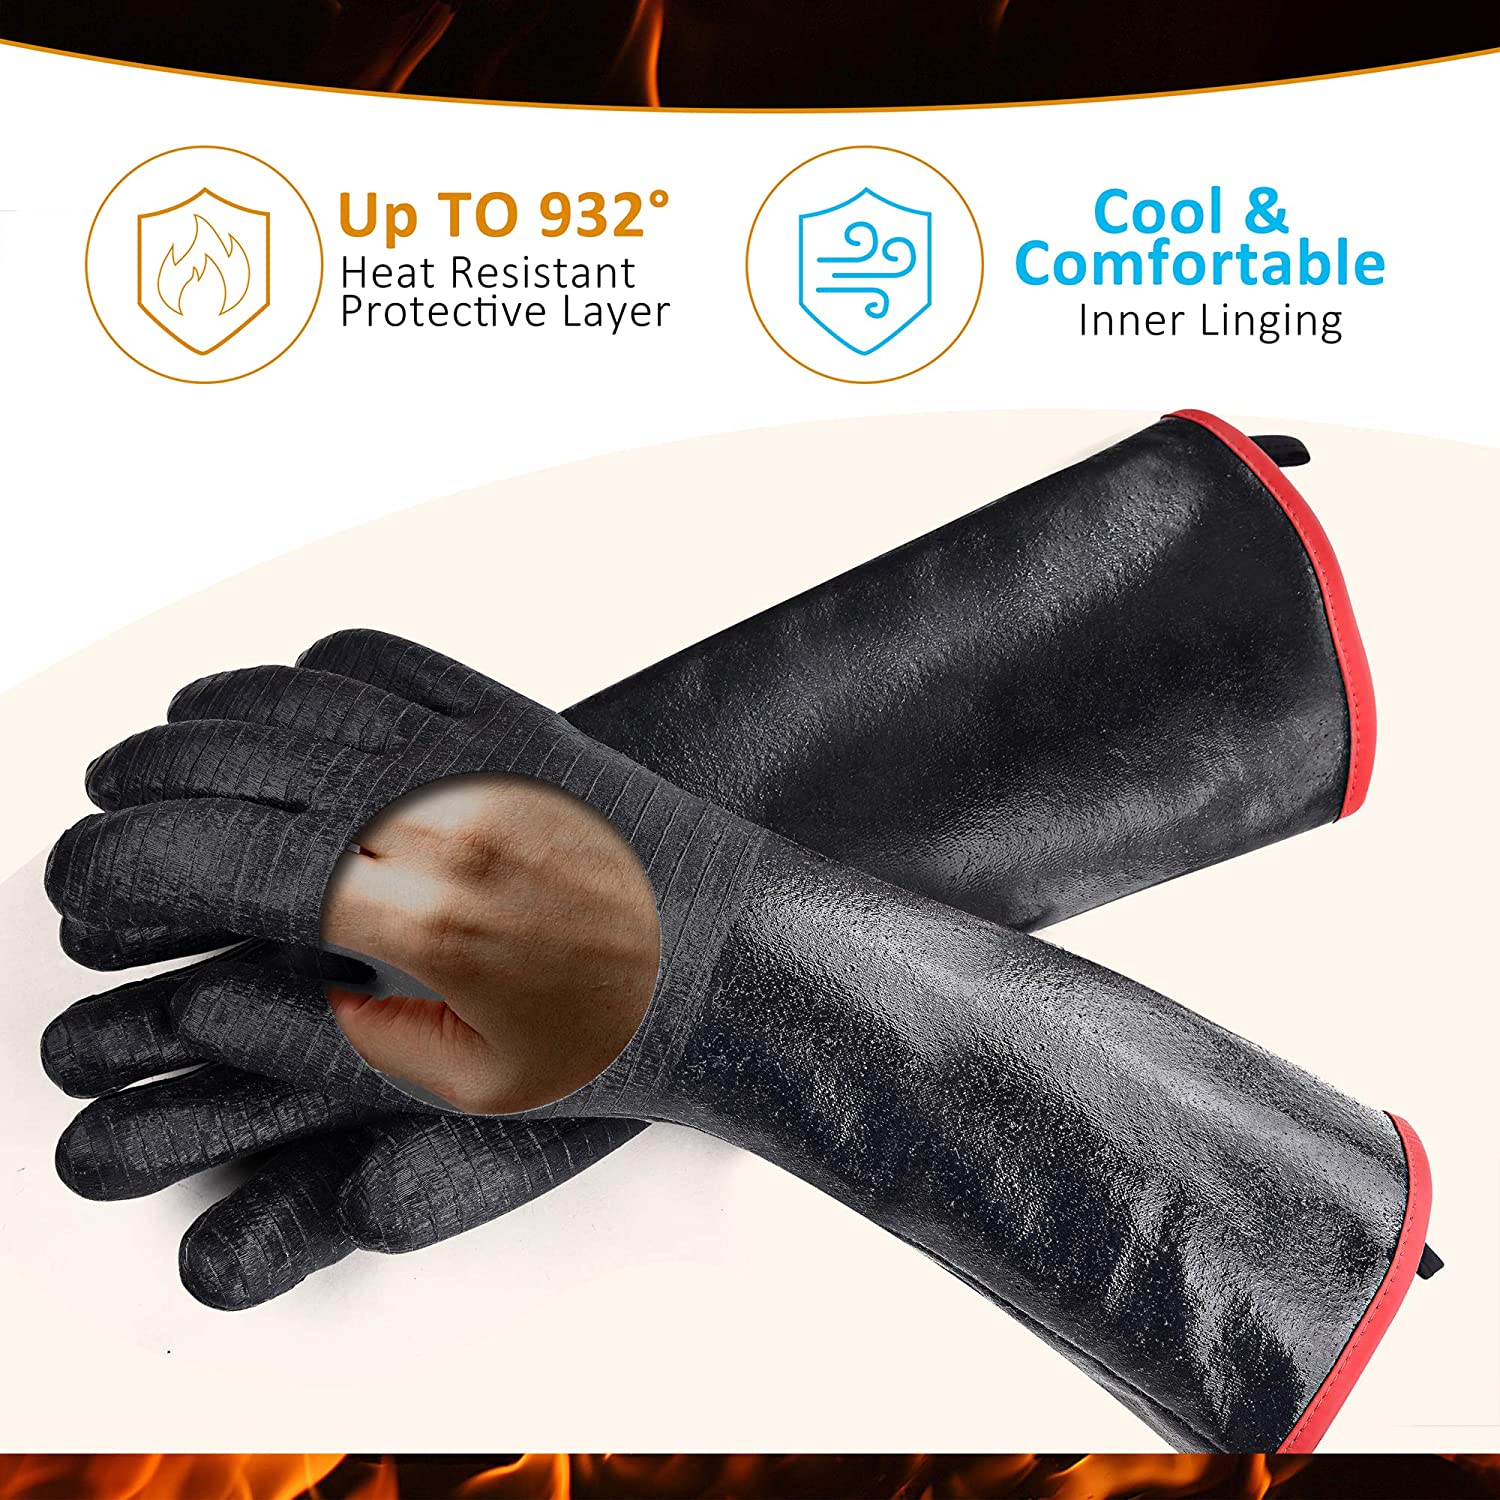 Heat Resistant-Smoker BBQ Gloves 14 Inches,932℉, Grill, Cooking Barbecue Gloves, to Handling Heat Food Right on Your Fryer,Grill,Oven. Waterproof, Fireproof, Oil Resistant Neoprene Coating - image 4 of 7